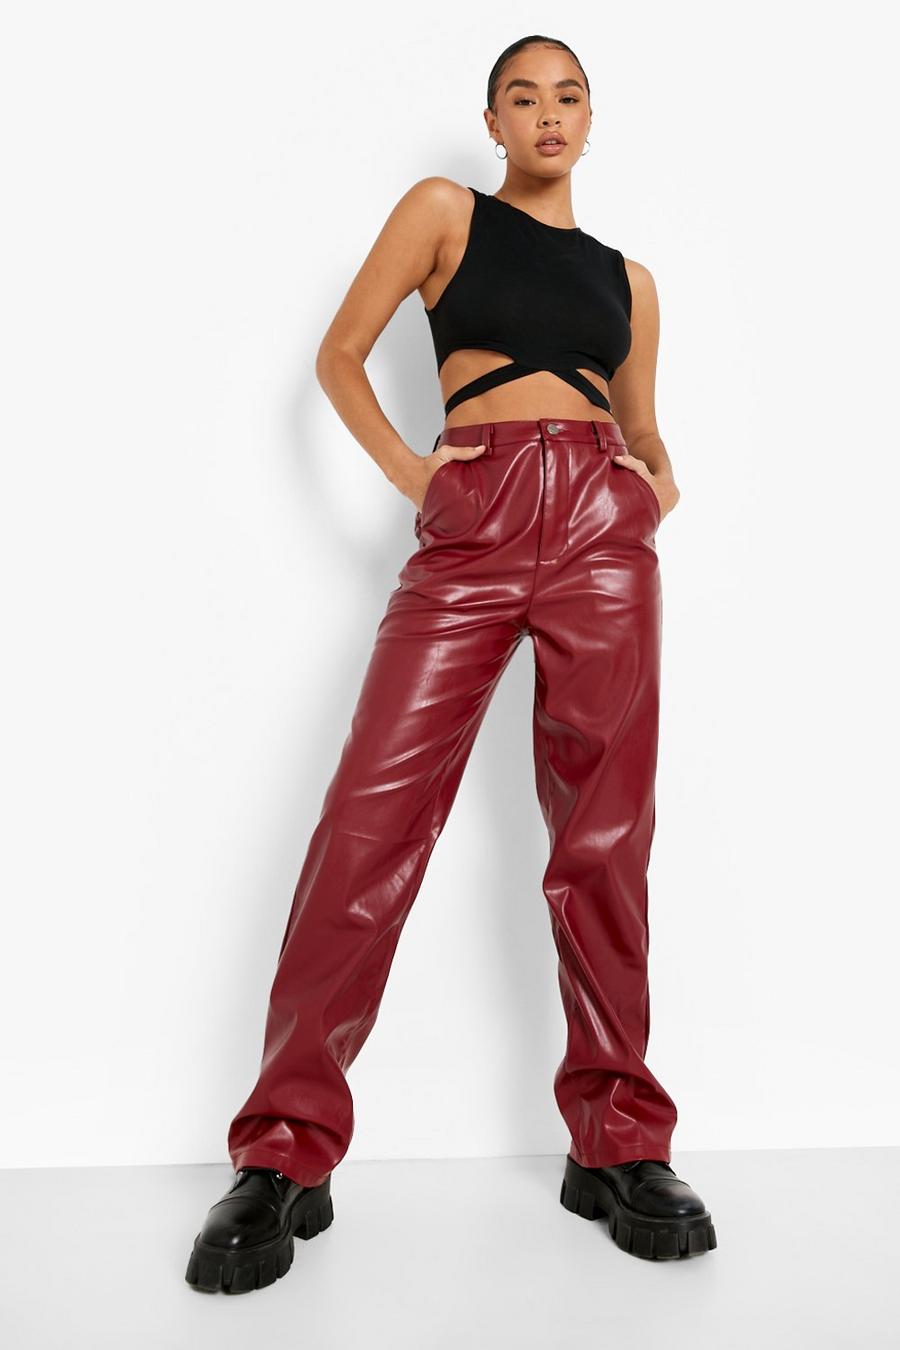 New Fashion Stright Pants Shorts Faux Leather Women's Fashion Casual Soft Pants 